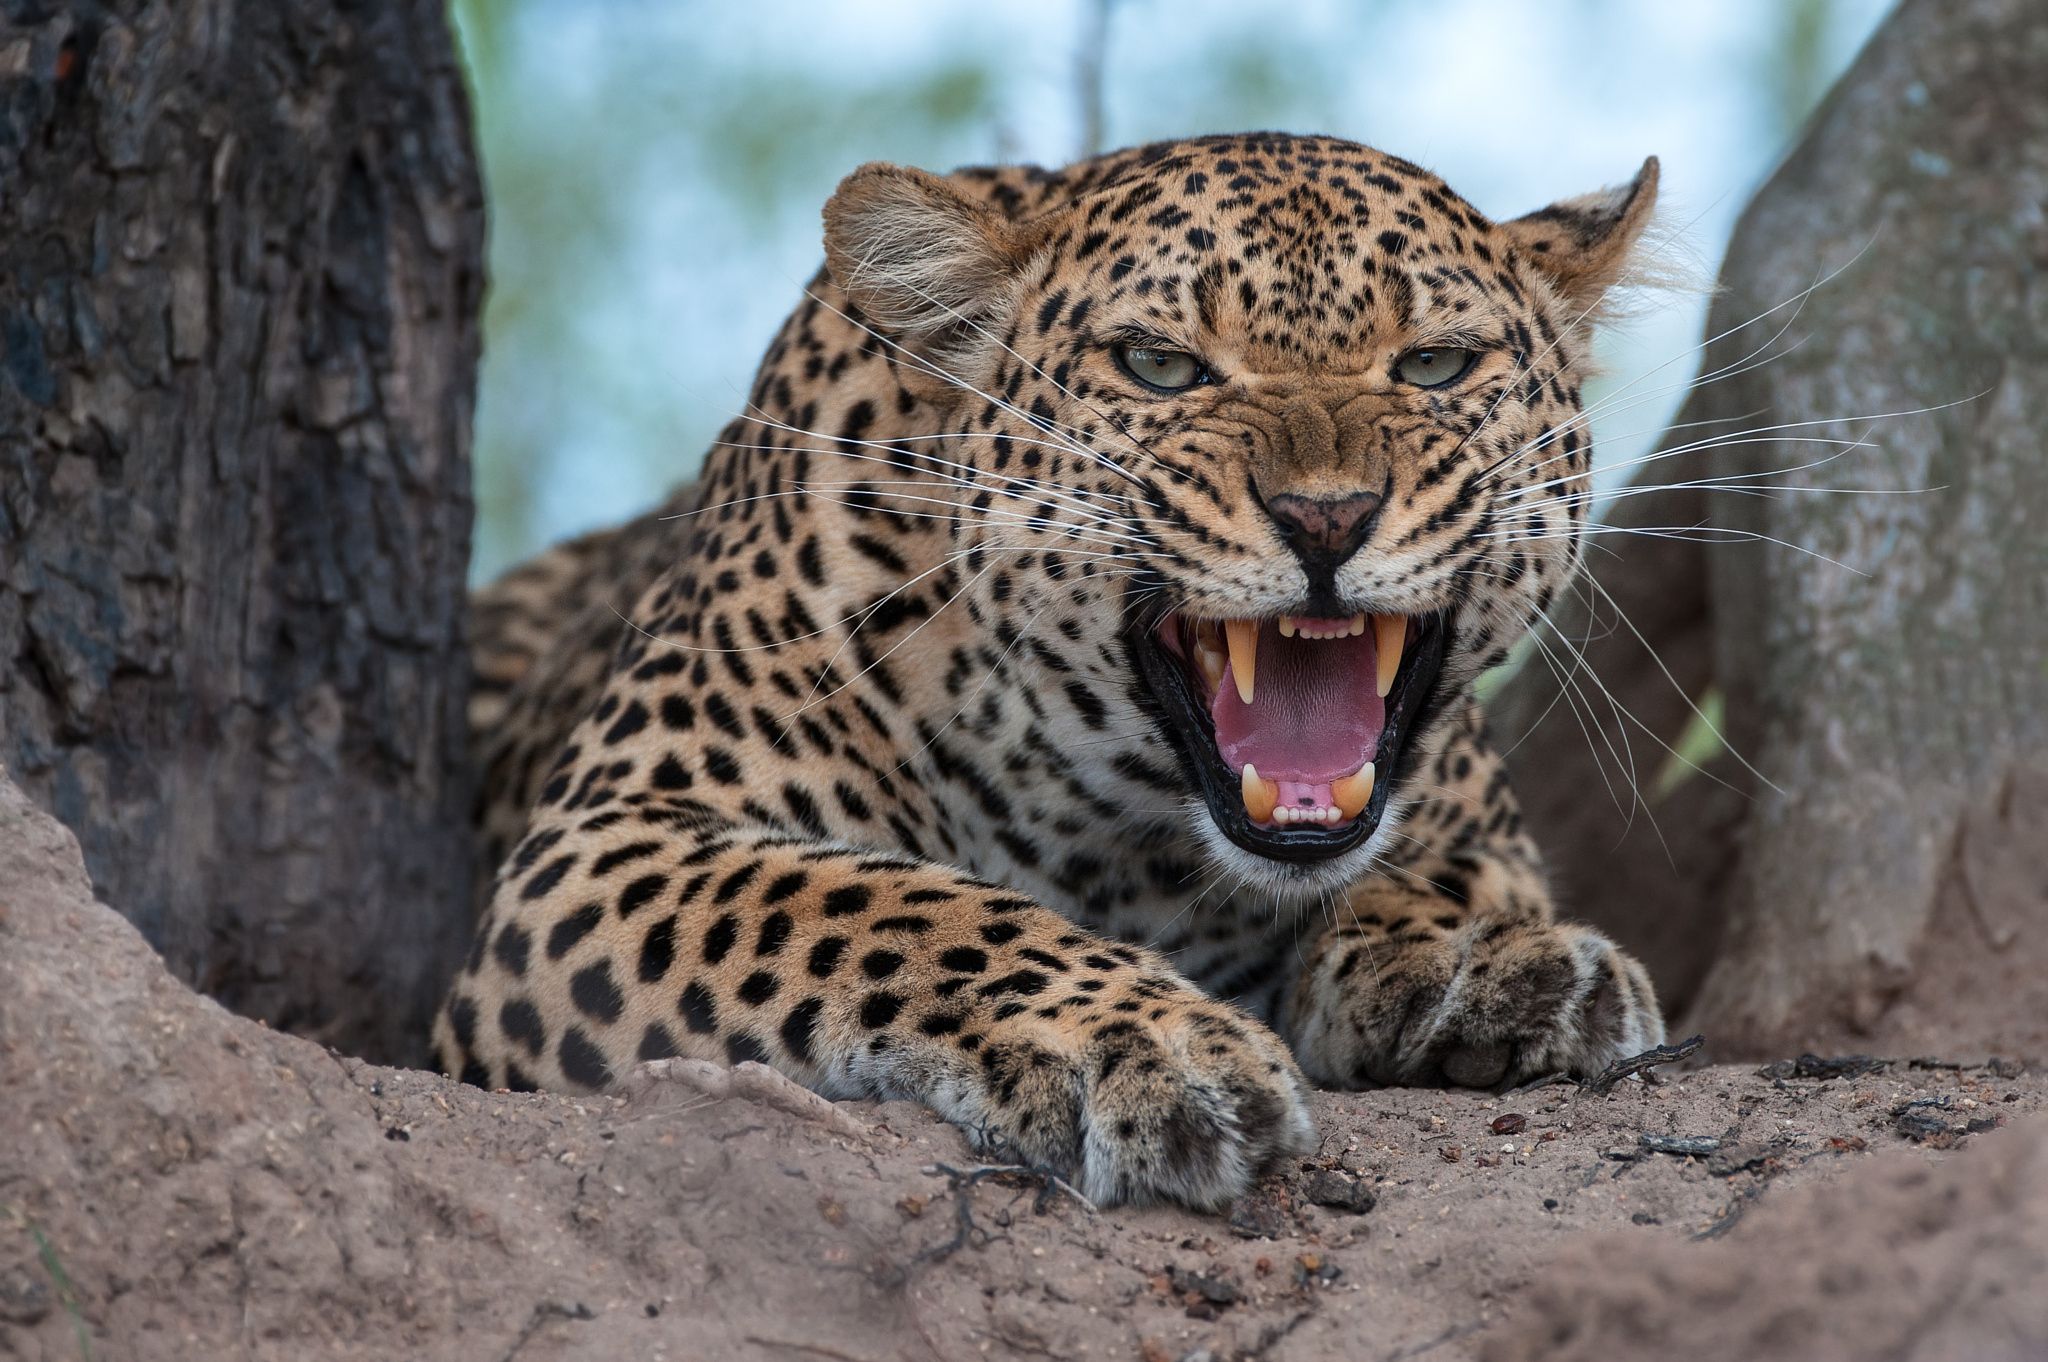 Leave the Leopard - There are just days that this Female Leopard ...